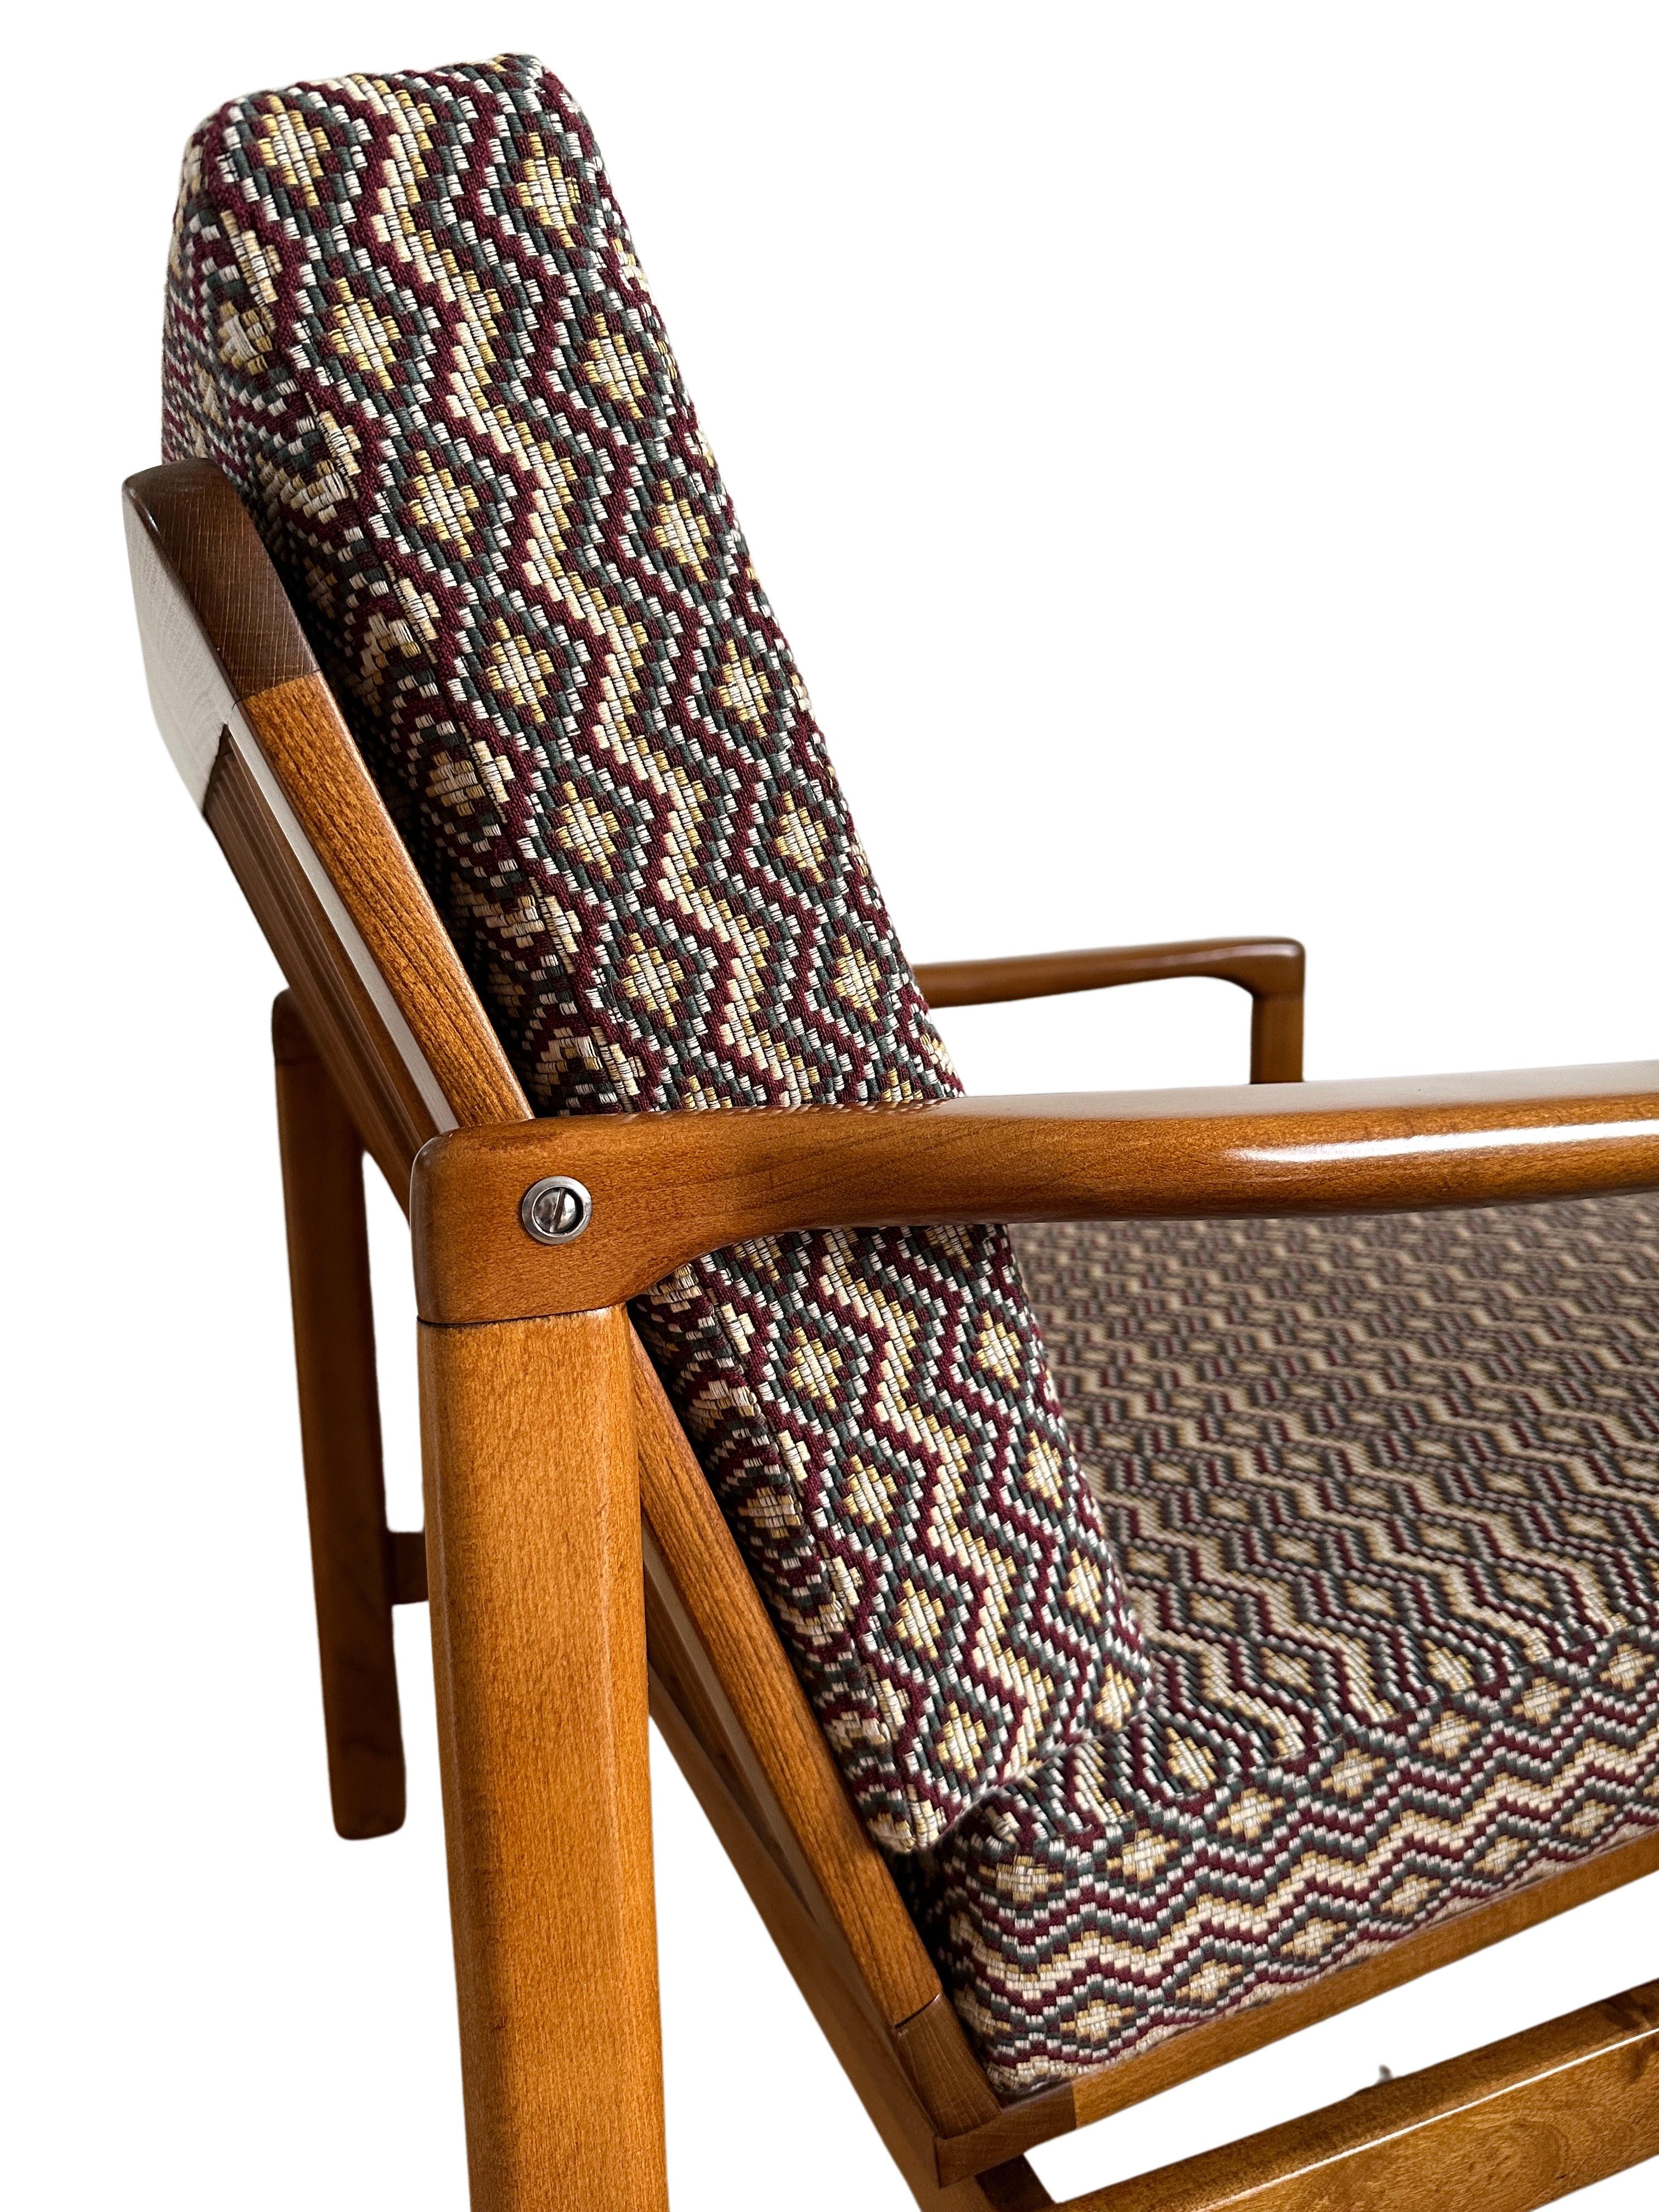 Set of Two Armchairs, Light Wood, Gaston Y Daniela Upholstery, Europe, 1960s For Sale 6